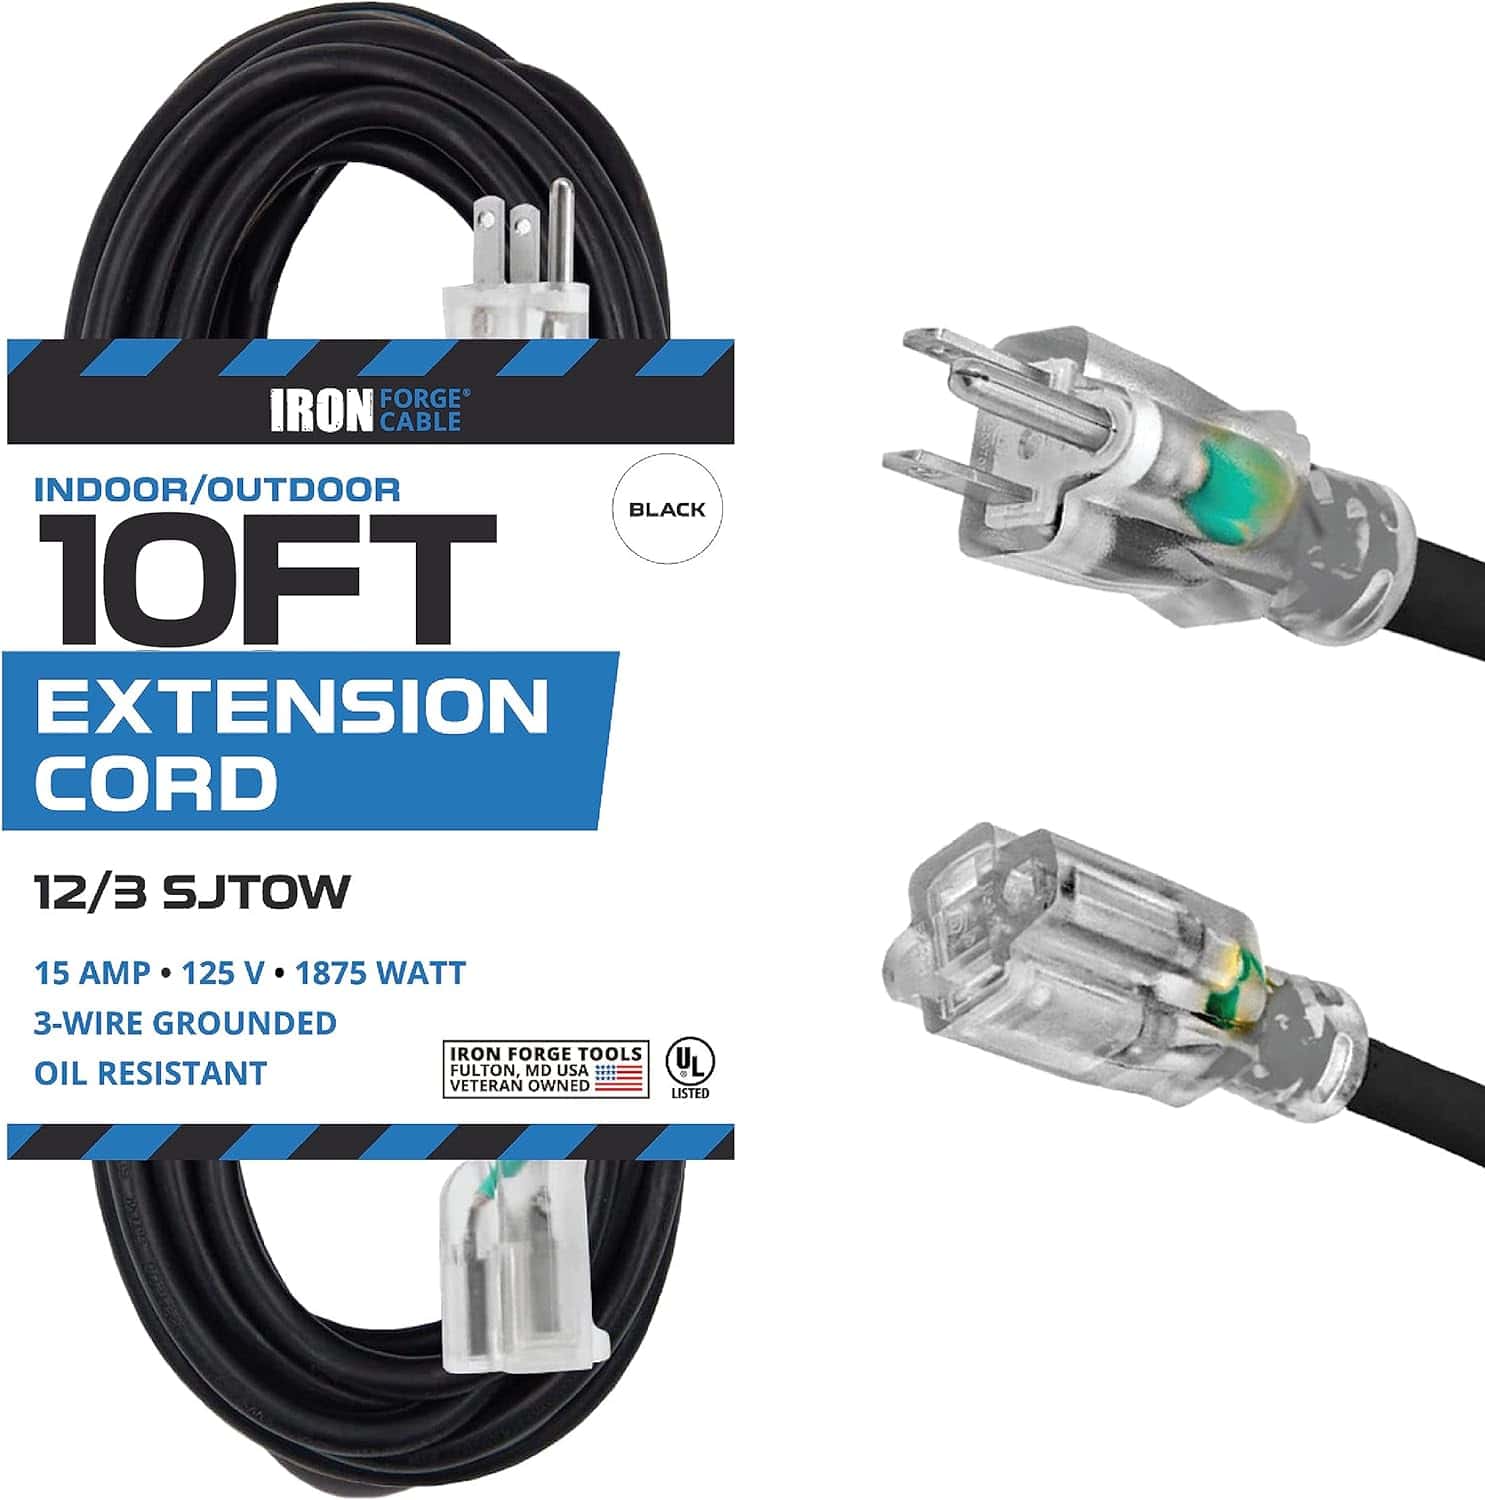 Iron Forge 10 Ft Heavy Duty Extension Cord Outdoor, SJTOW Oil Resistant 12 Gauge Extension Cord 10ft with 3 Prong, 12 3 Black Extension Cord Great for Farm, Ranch, Workshop – 15 AMP, US Veteran Owned 1